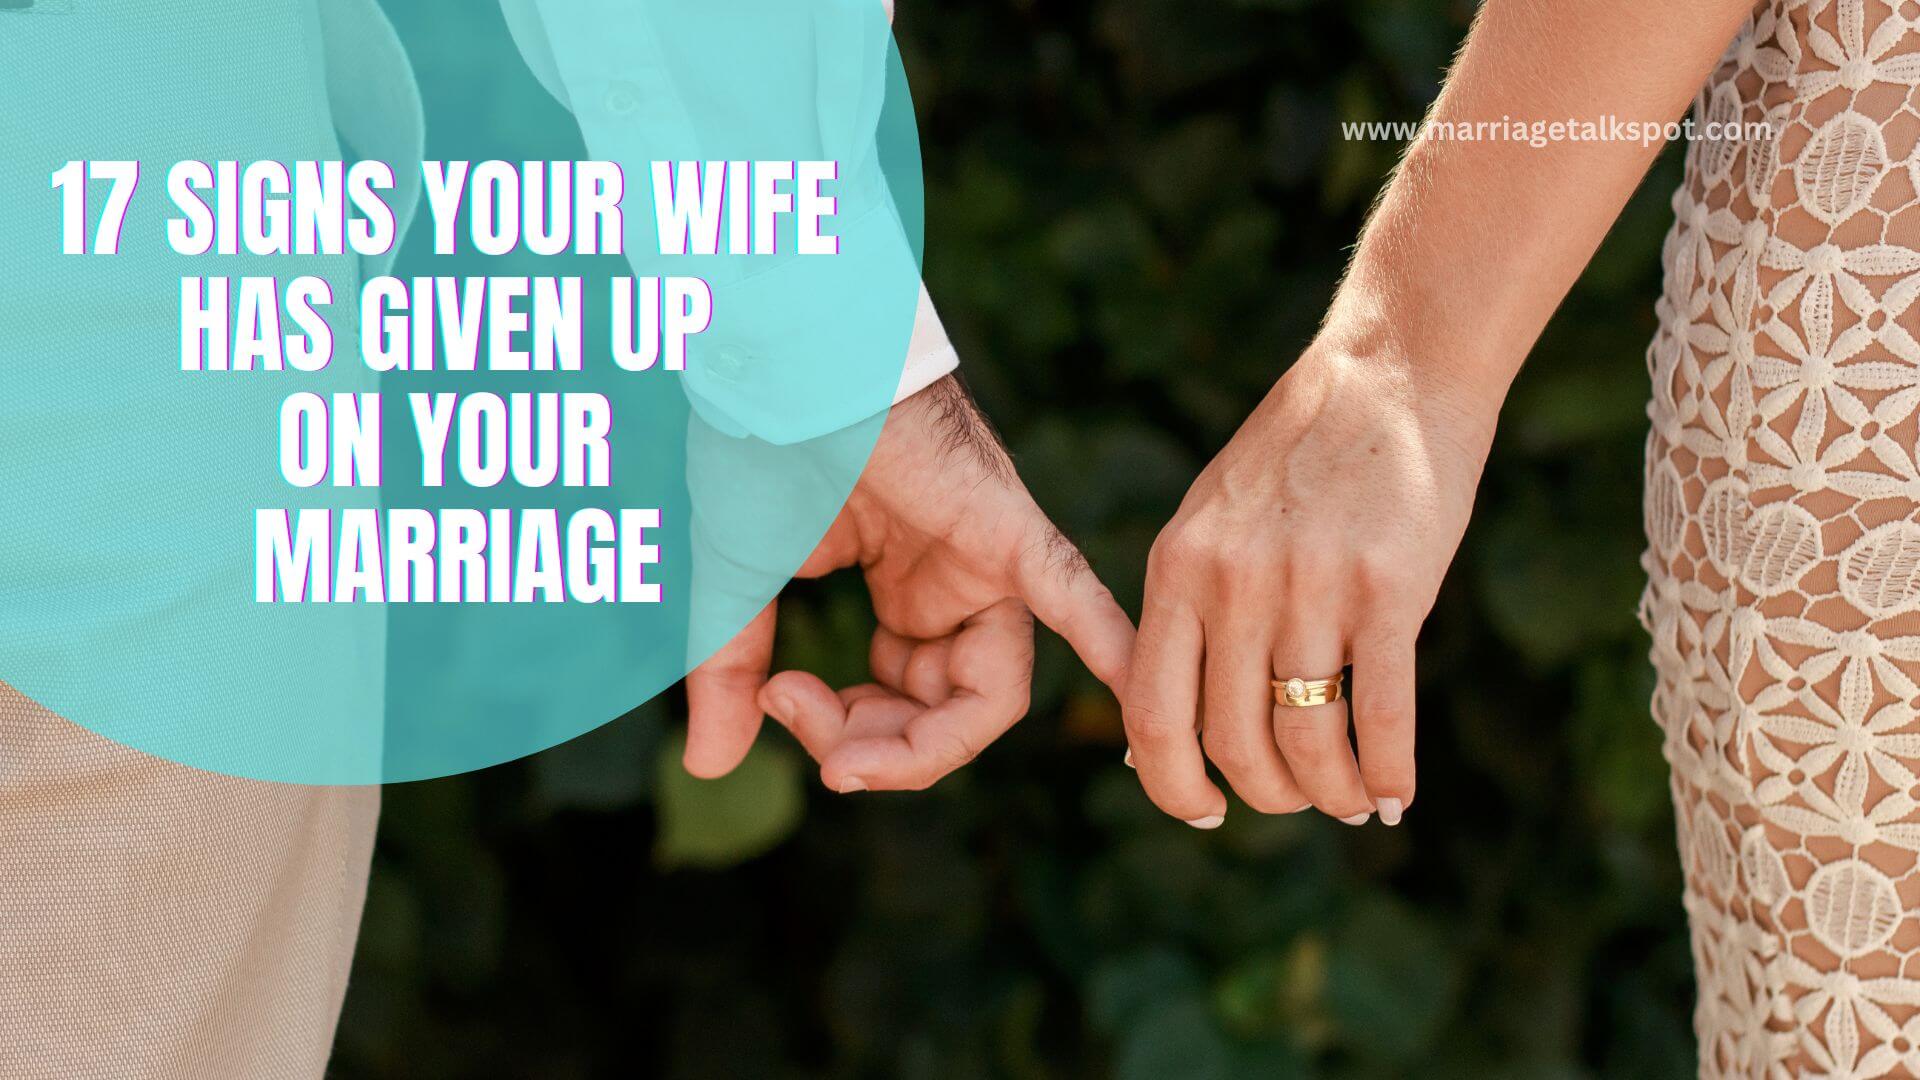 SIGNS YOUR WIFE HAS GIVEN UP ON YOUR MARRIAGE